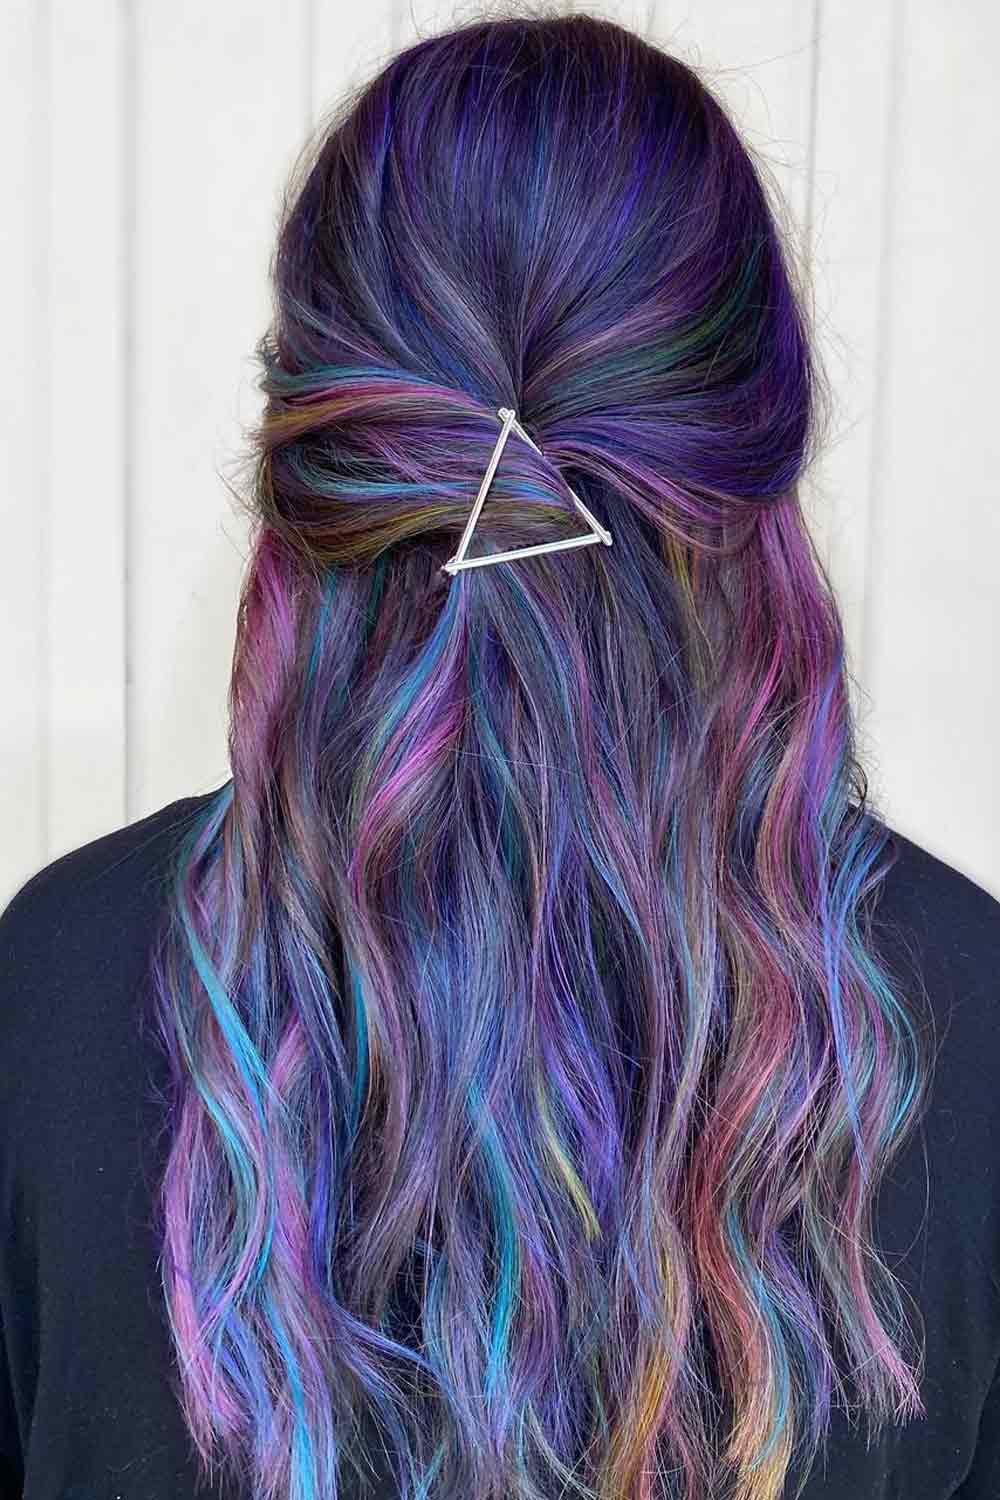 Long Mermaid Hair with Colorful Highlights